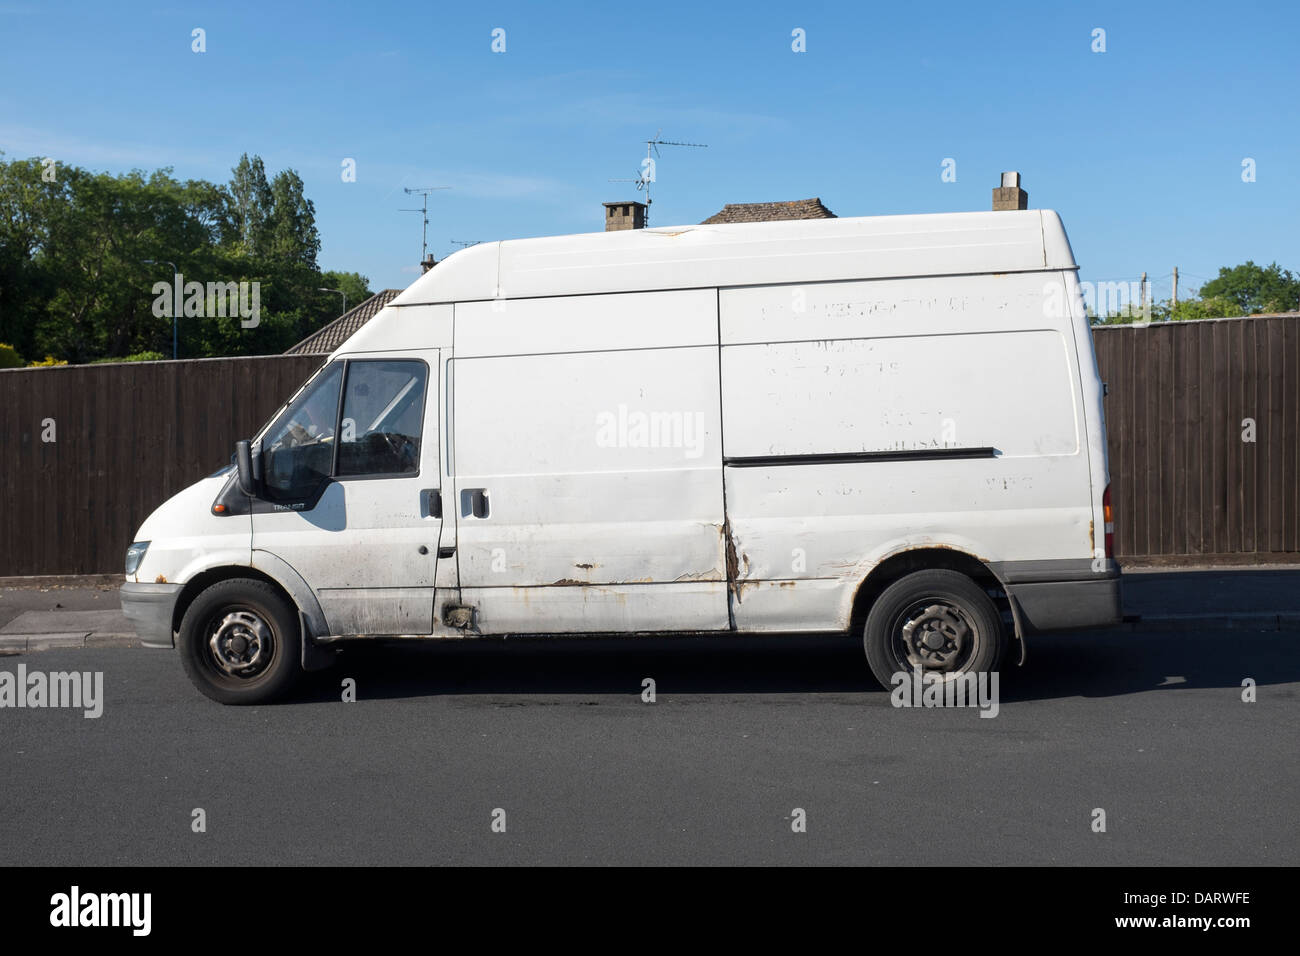 Small White Van High Resolution Stock Photography and Images - Alamy